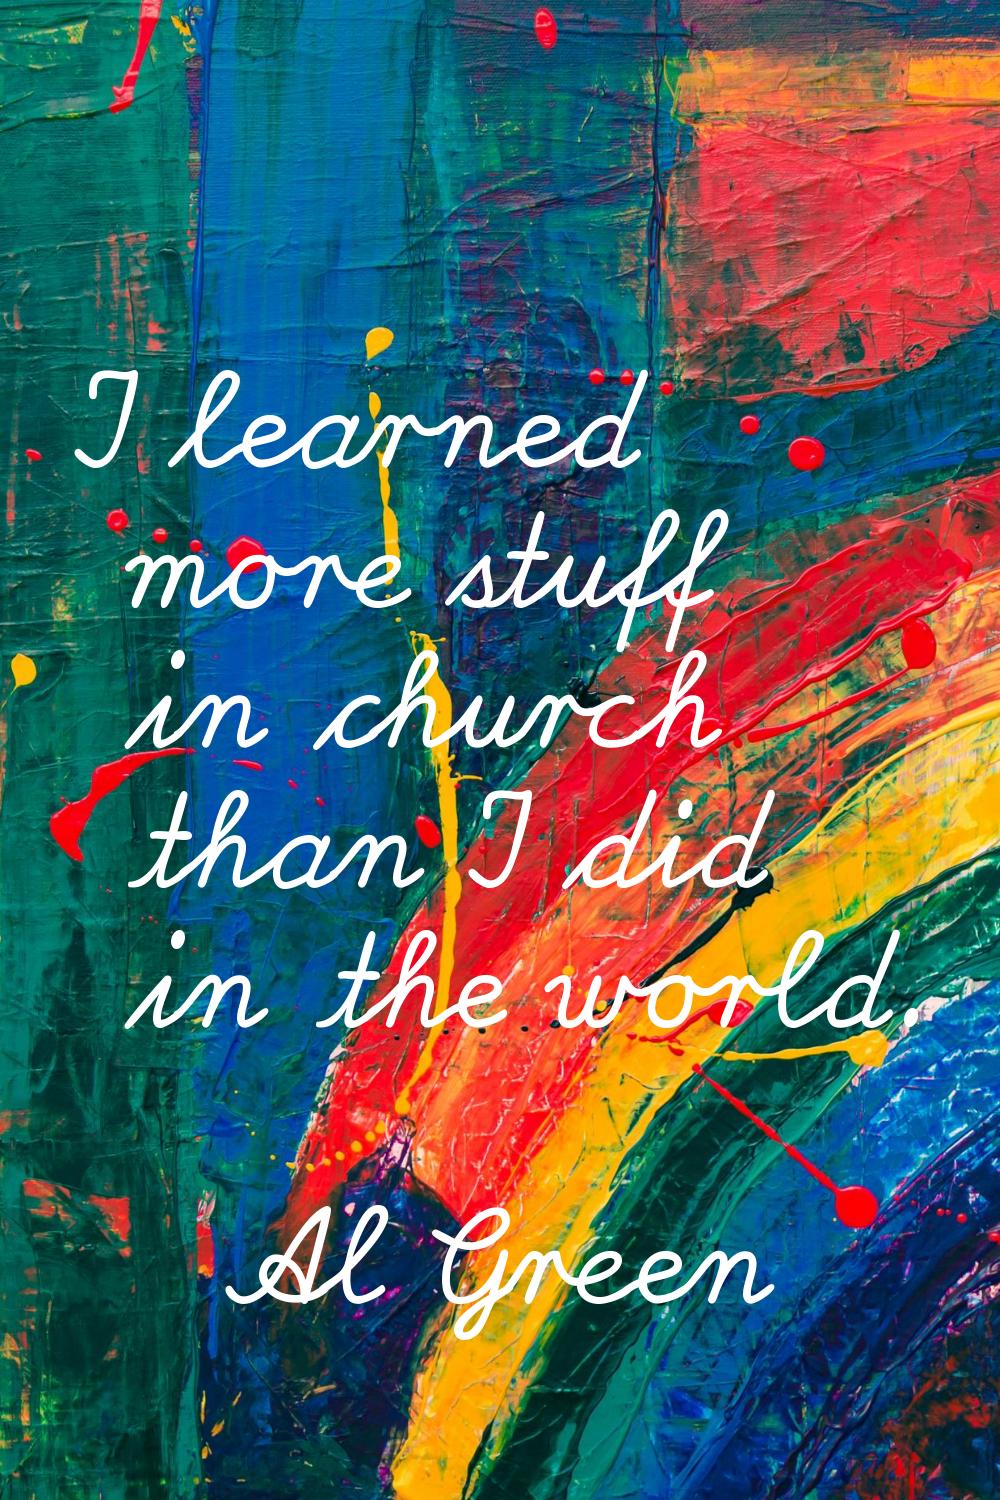 I learned more stuff in church than I did in the world.